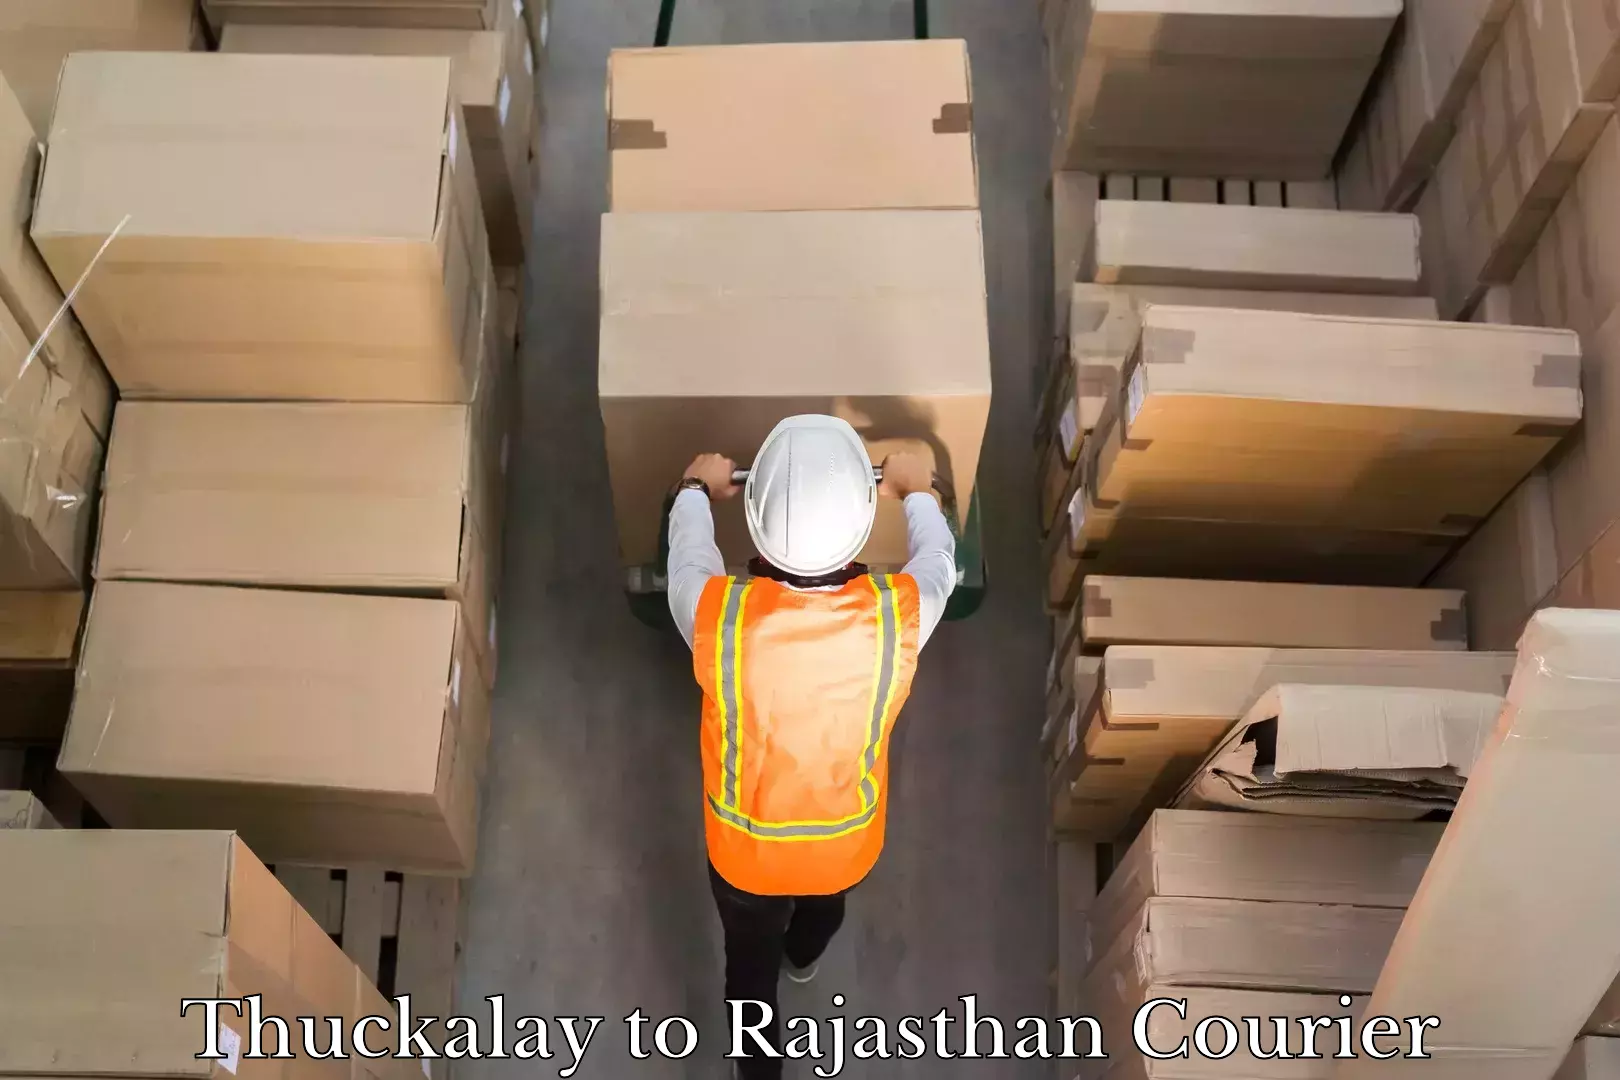 Nationwide courier service Thuckalay to Rajasthan